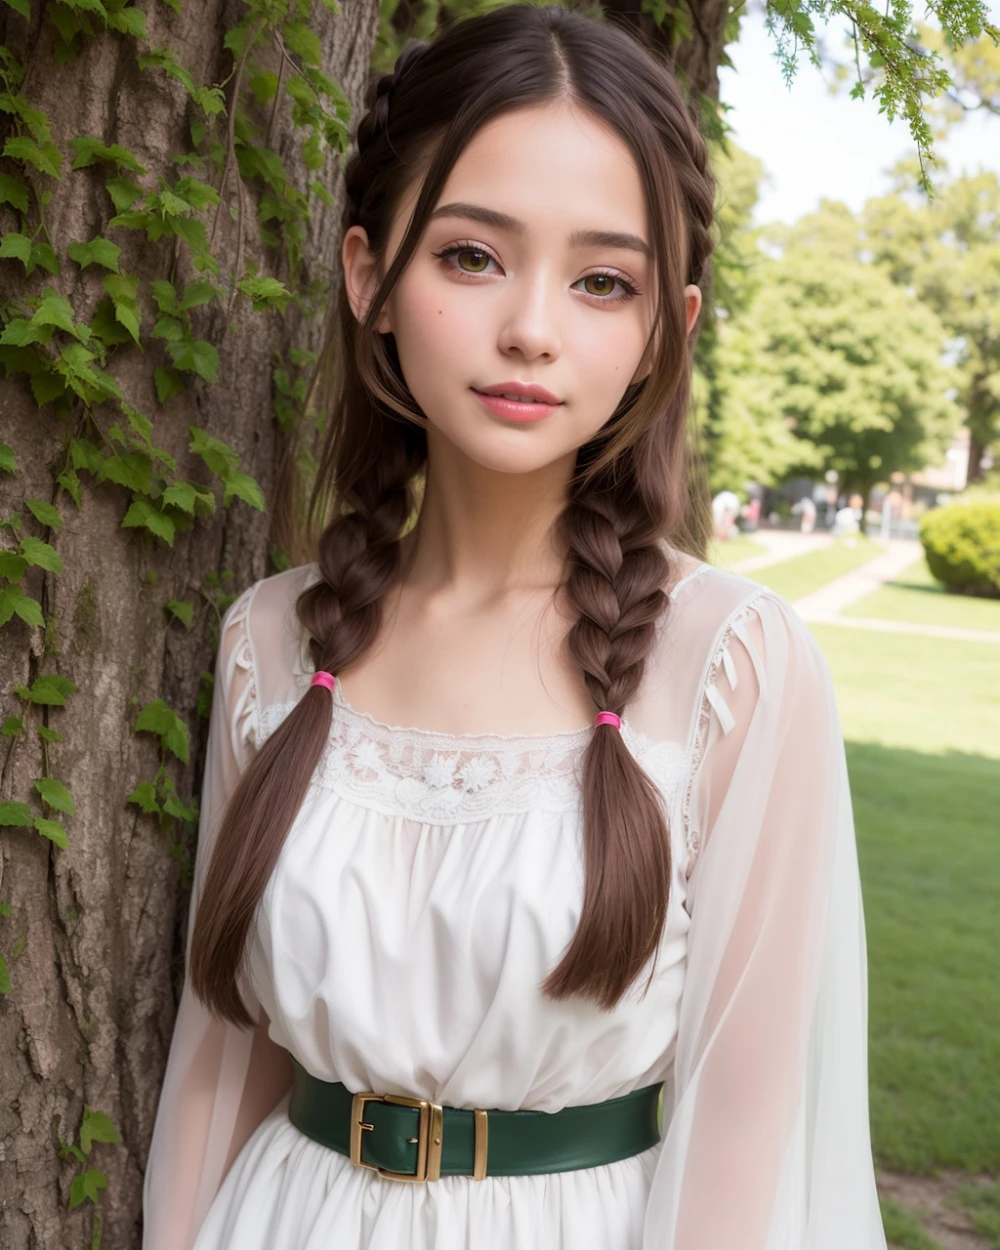 braid-realistic-style-all-ages-12